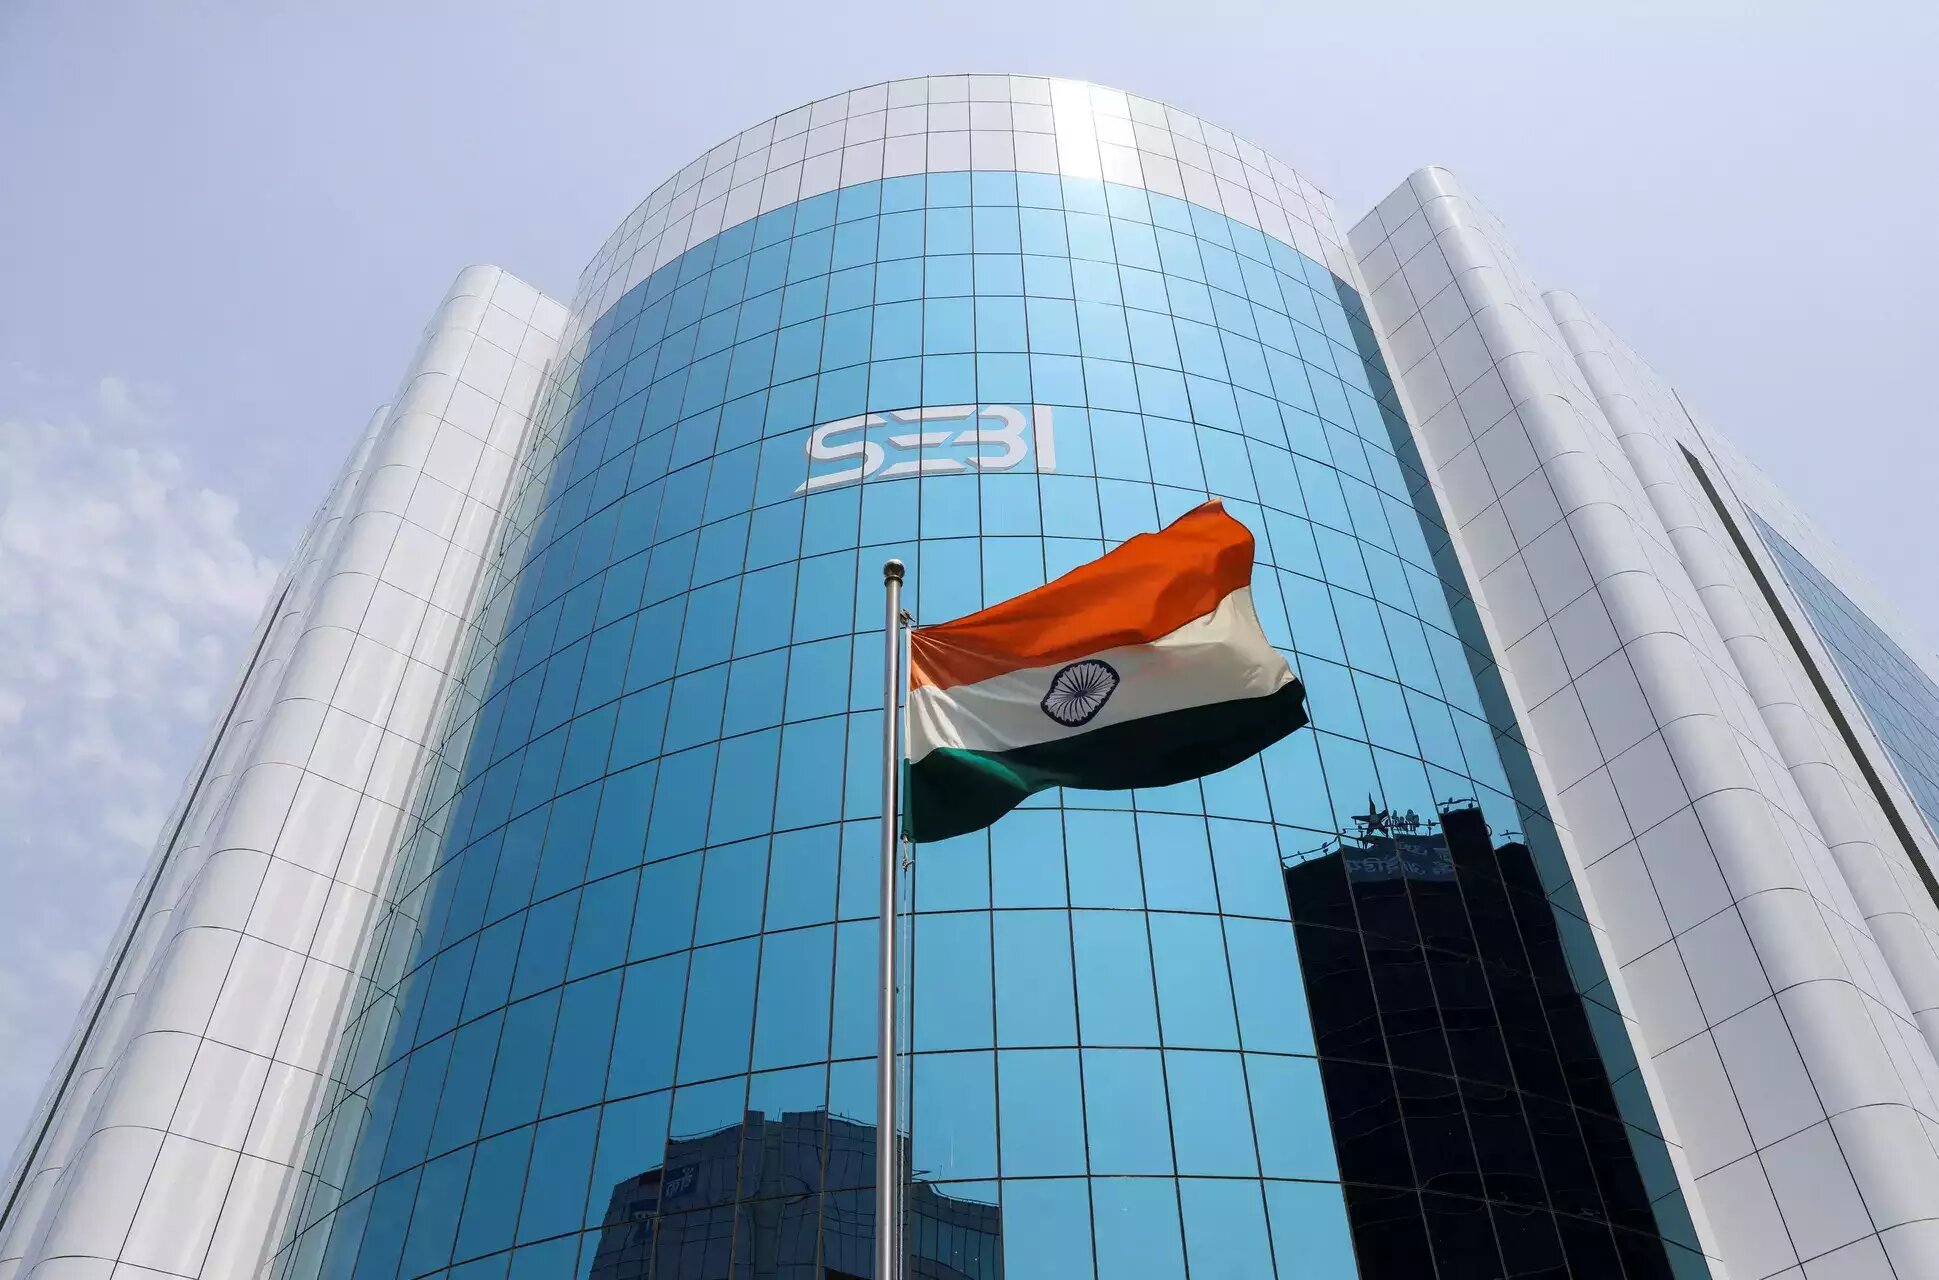 Sebi board likely to discuss regulation of realty platforms, delisting changes